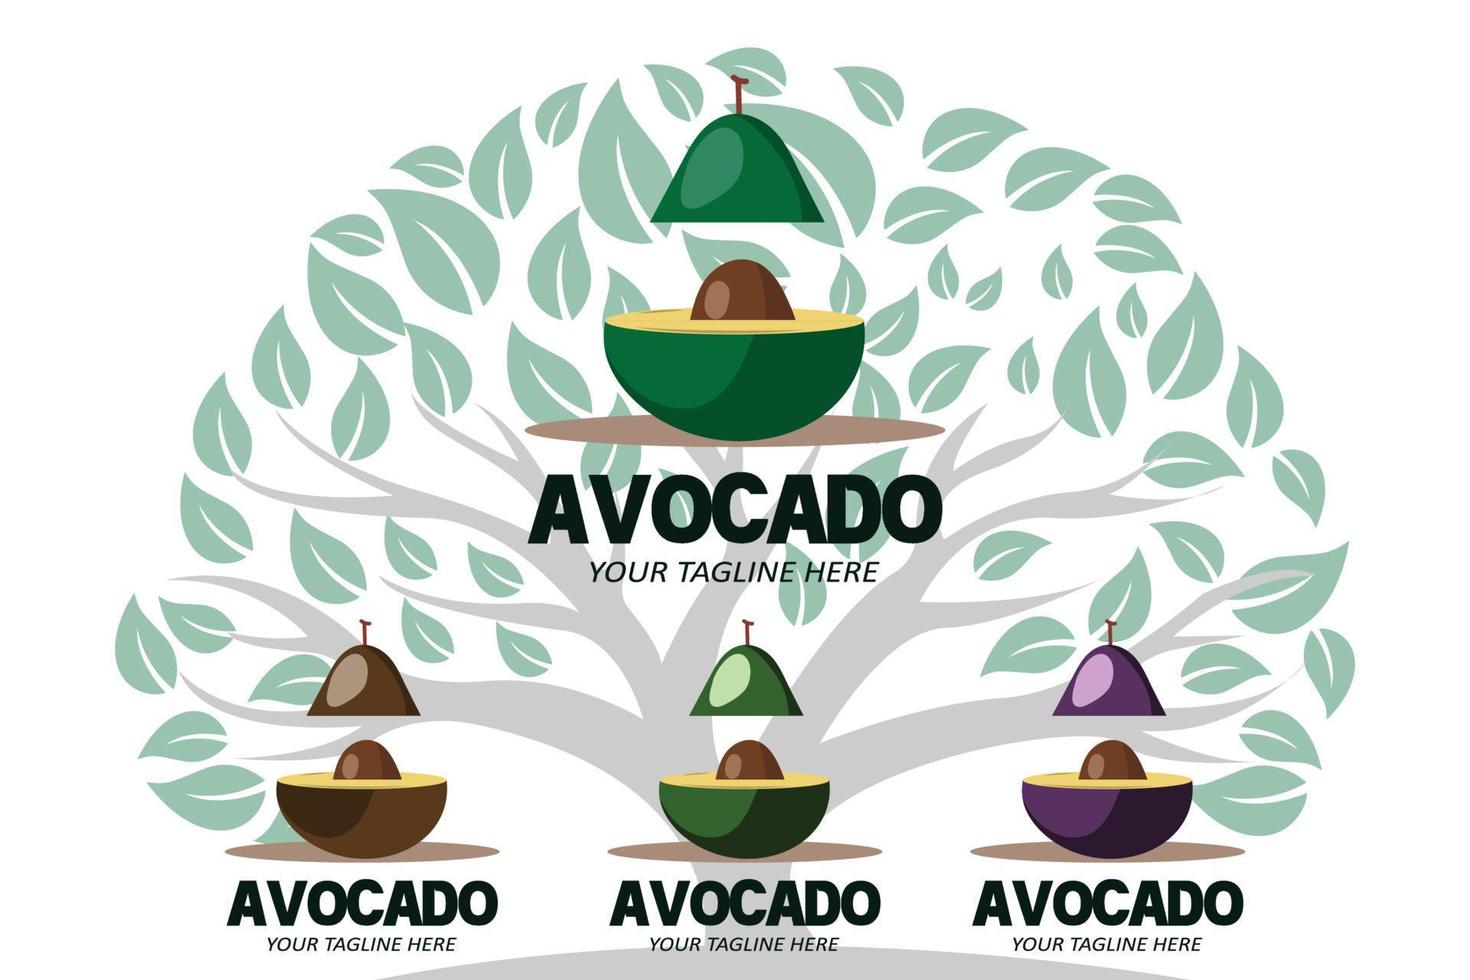 Vector Illustration Of Avocado Fruit Logo Fresh Fruit In Green Color, Available On The Market Can Be For Fruit Juice Or For Body Health, Screen Printing Design, Sticker, Banner, Fruit Company